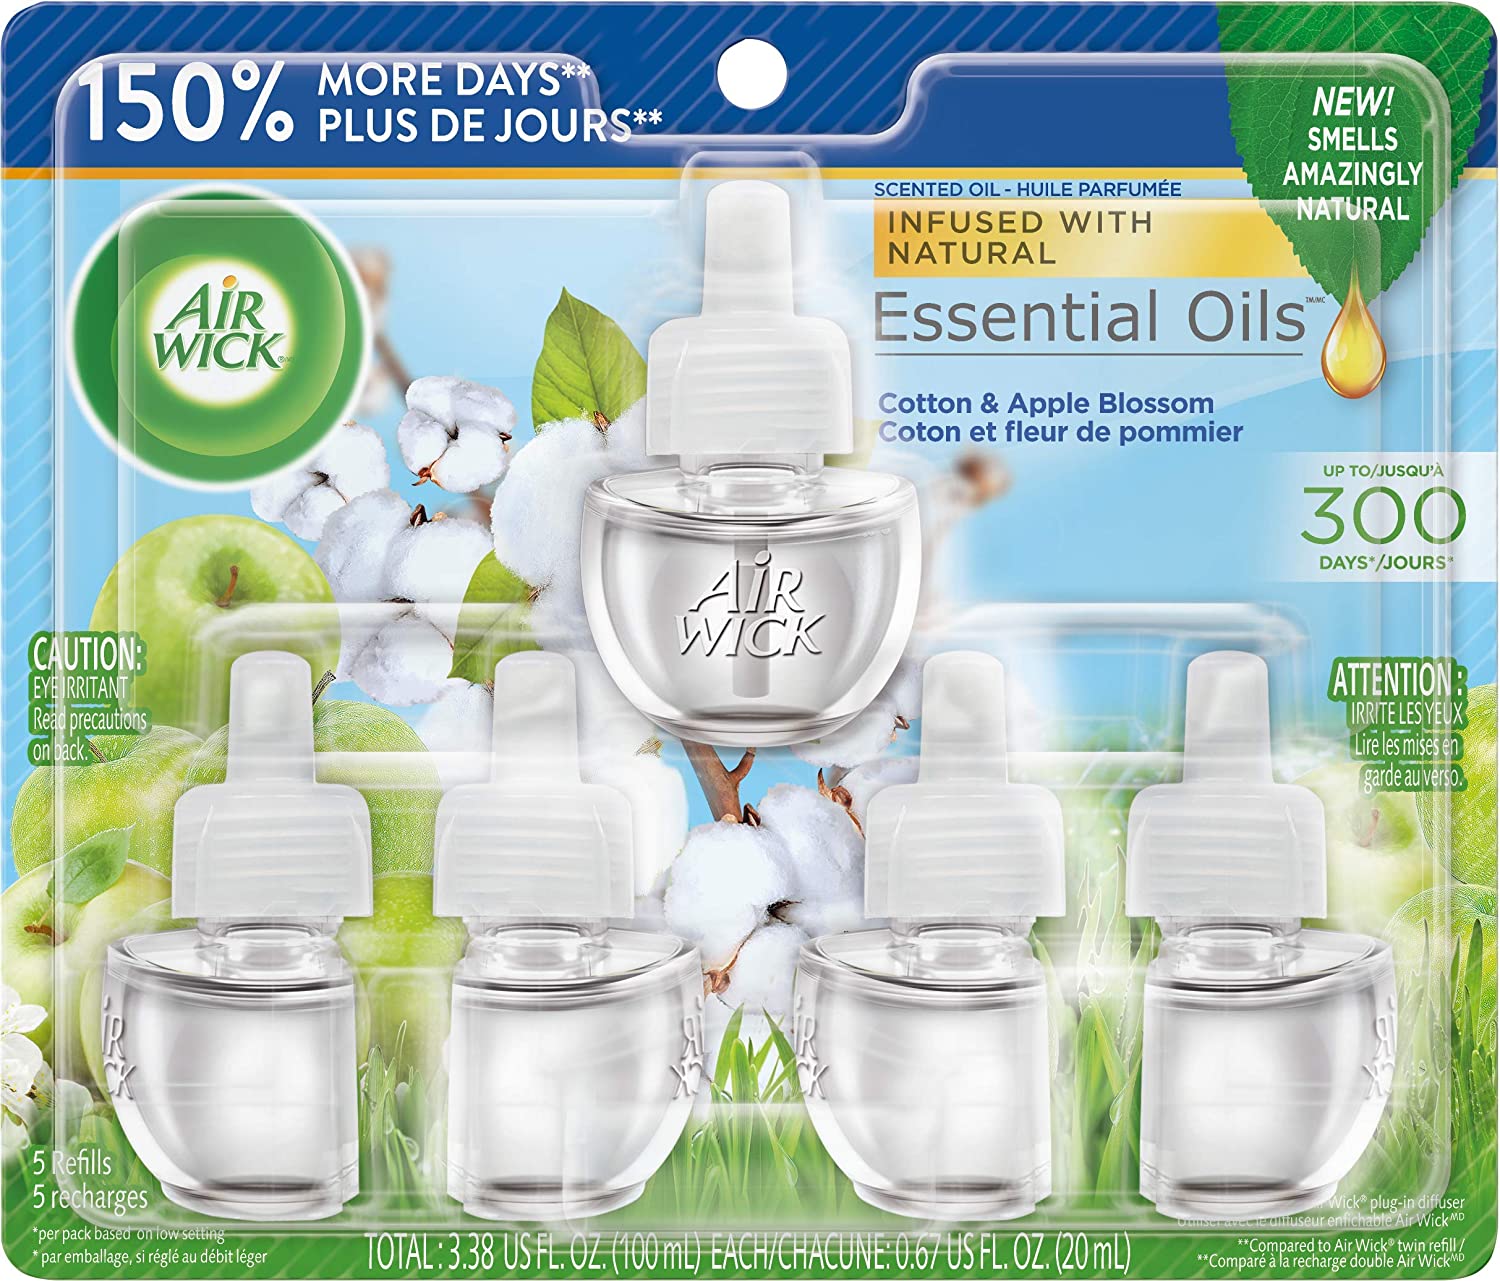 Air Wick Essential Oils Coupon